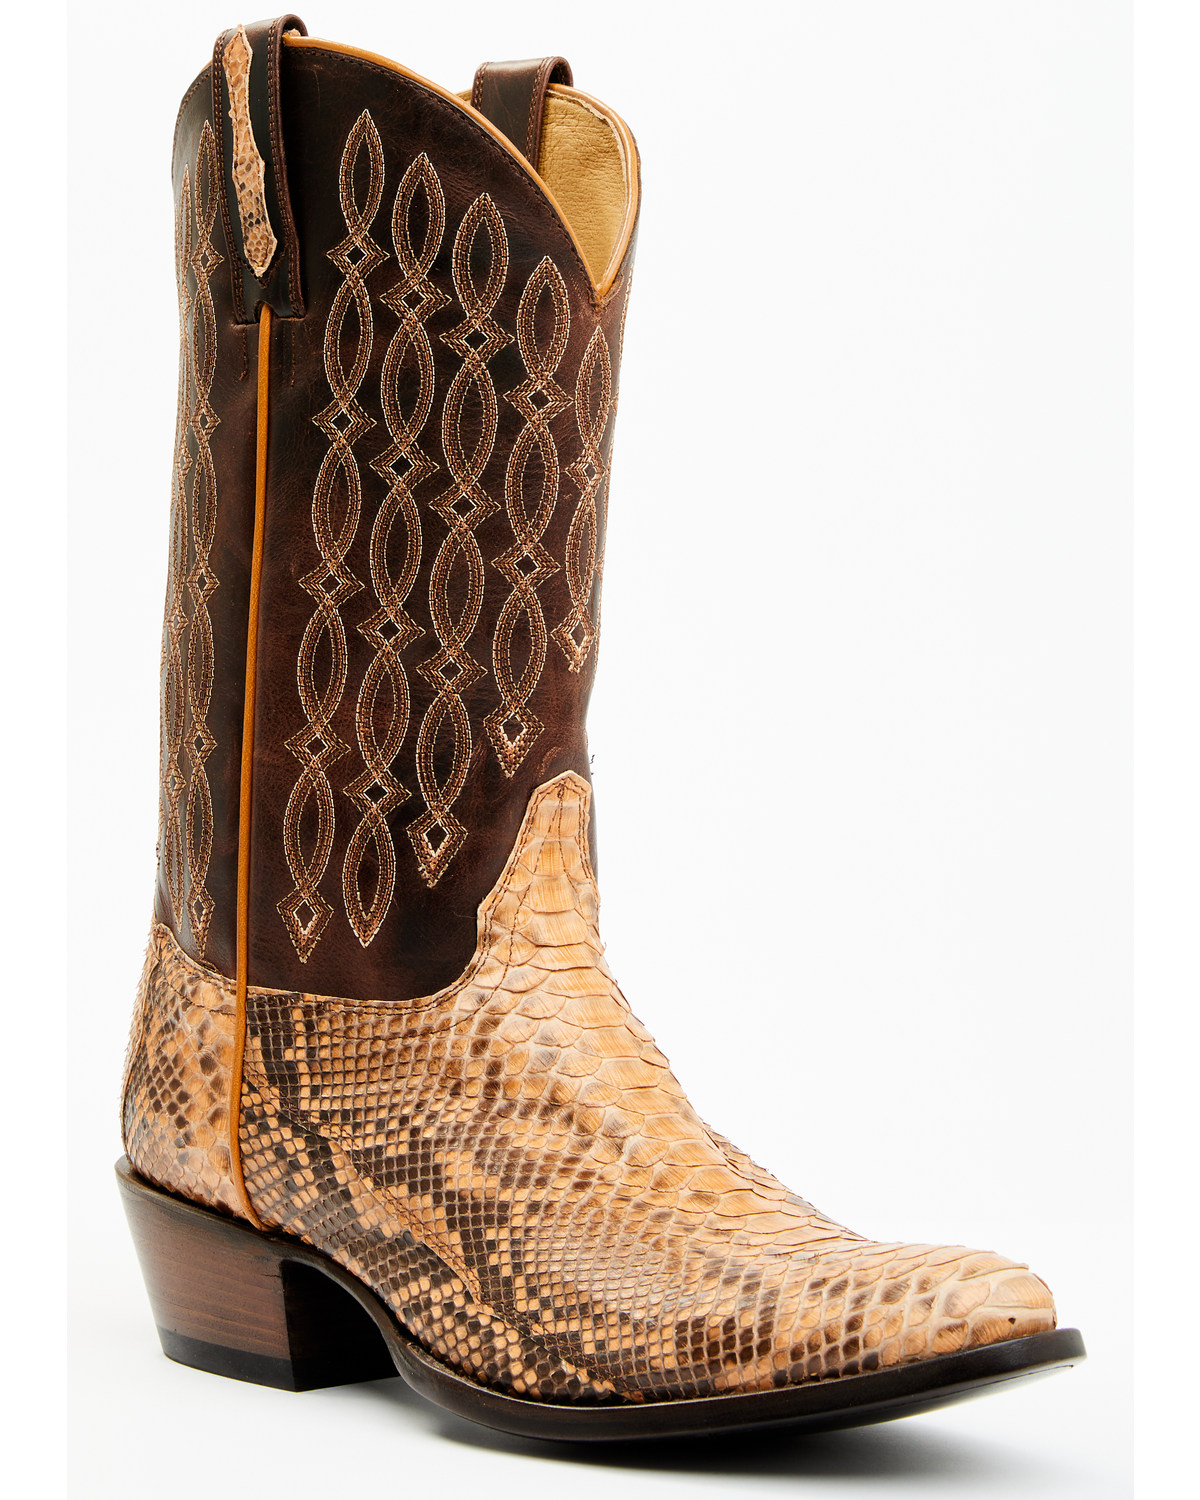 Cody James Men's Exotic Python Western Boots - Round Toe